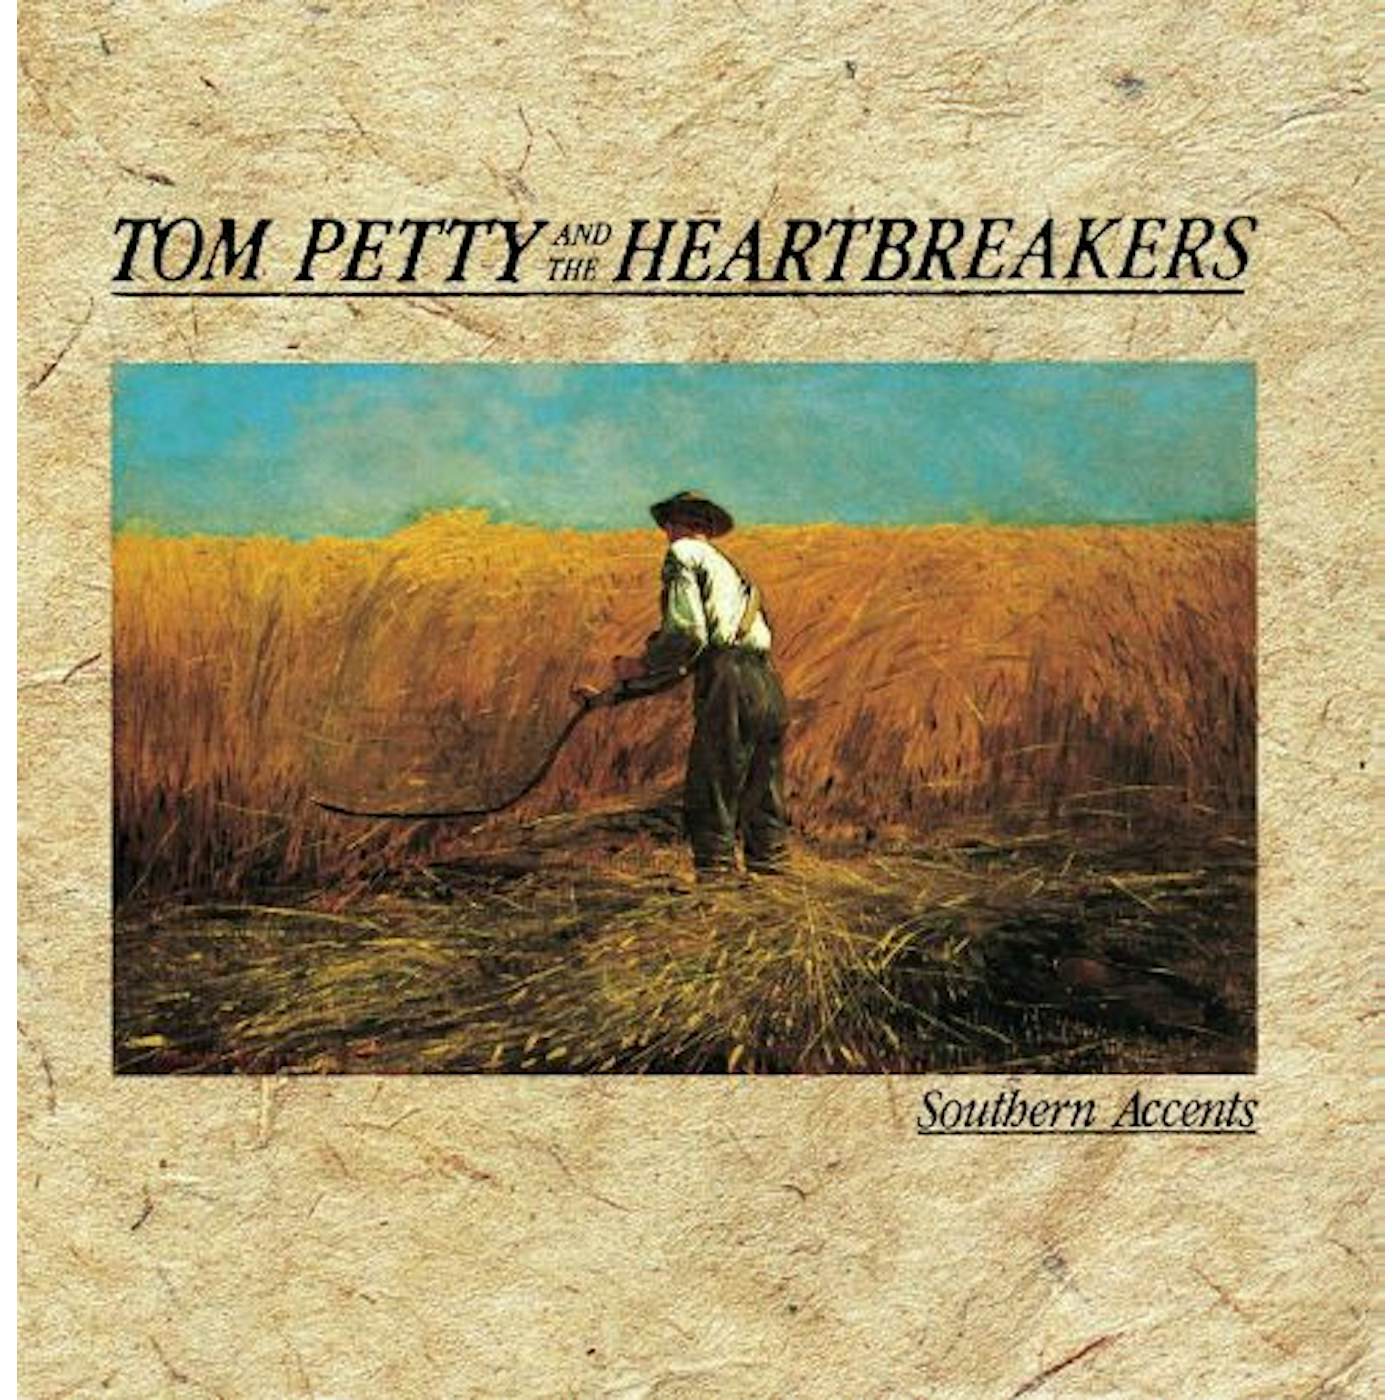 Tom Petty and the Heartbreakers Southern Accents Vinyl Record